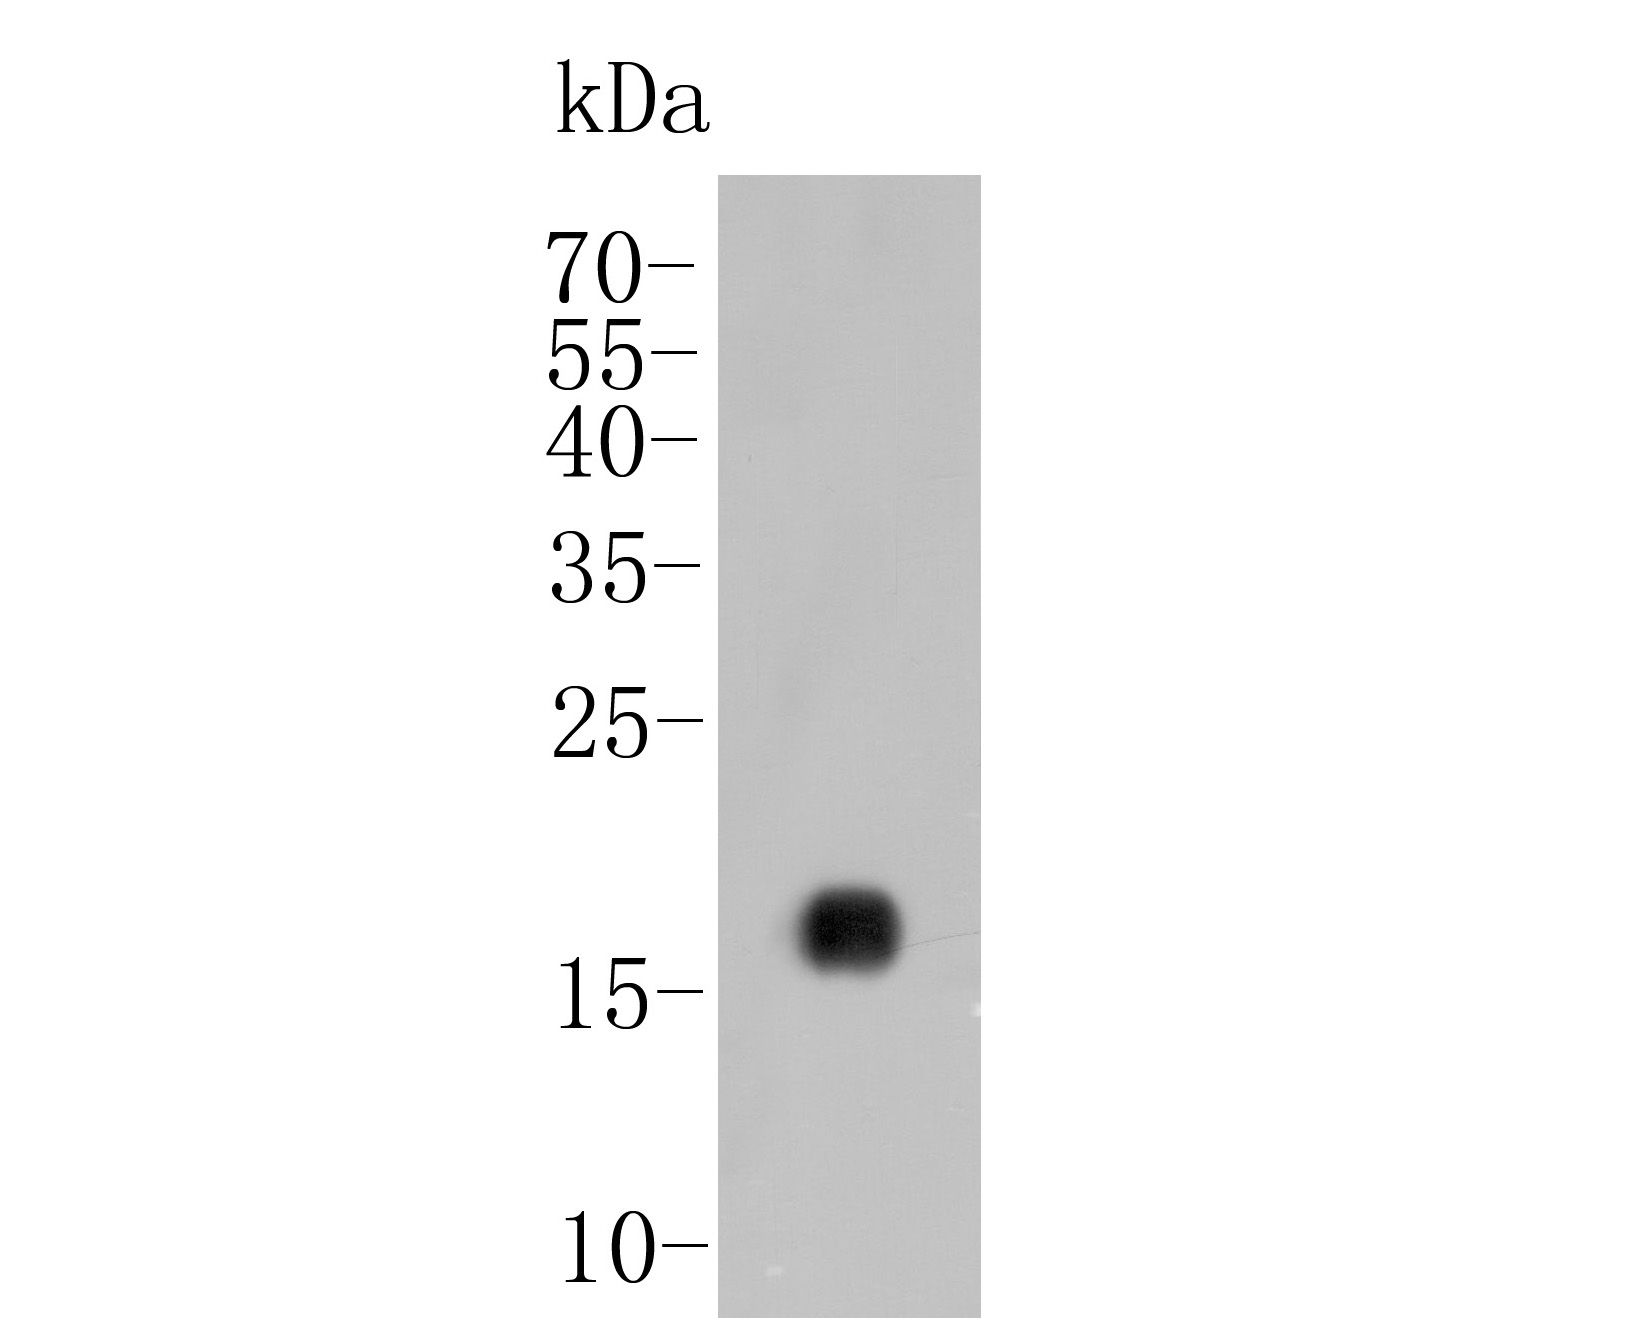 Western blot analysis of IL17A on recombinant protein lysate. Proteins were transferred to a PVDF membrane and blocked with 5% BSA in PBS for 1 hour at room temperature. The primary antibody (ER1902-37, 1/20000) was used in 5% BSA at room temperature for 2 hours. Goat Anti-Rabbit IgG - HRP Secondary Antibody (HA1001) at 1:5,000 dilution was used for 1 hour at room temperature.